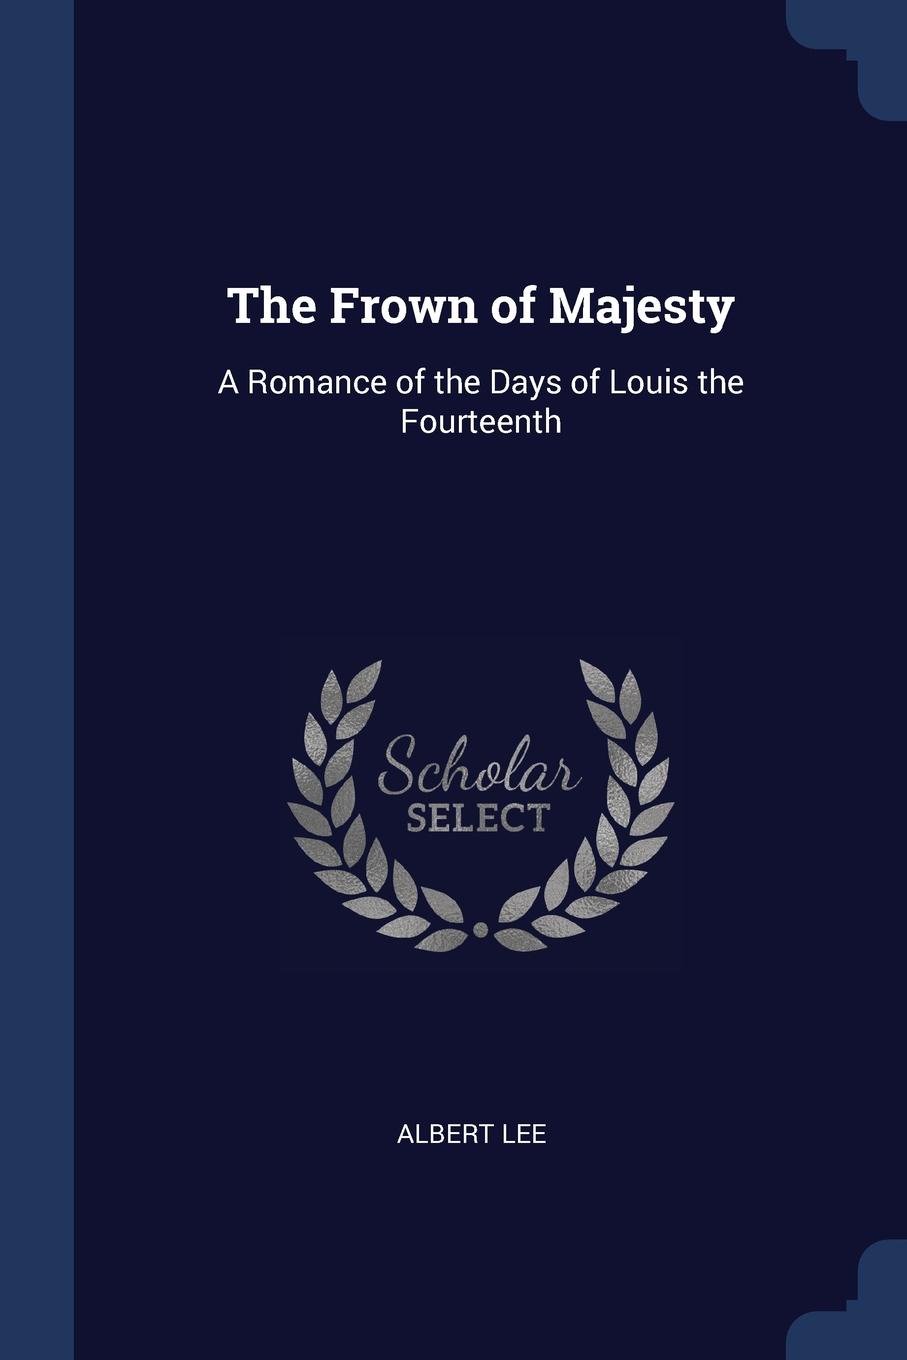 The Frown of Majesty. A Romance of the Days of Louis the Fourteenth